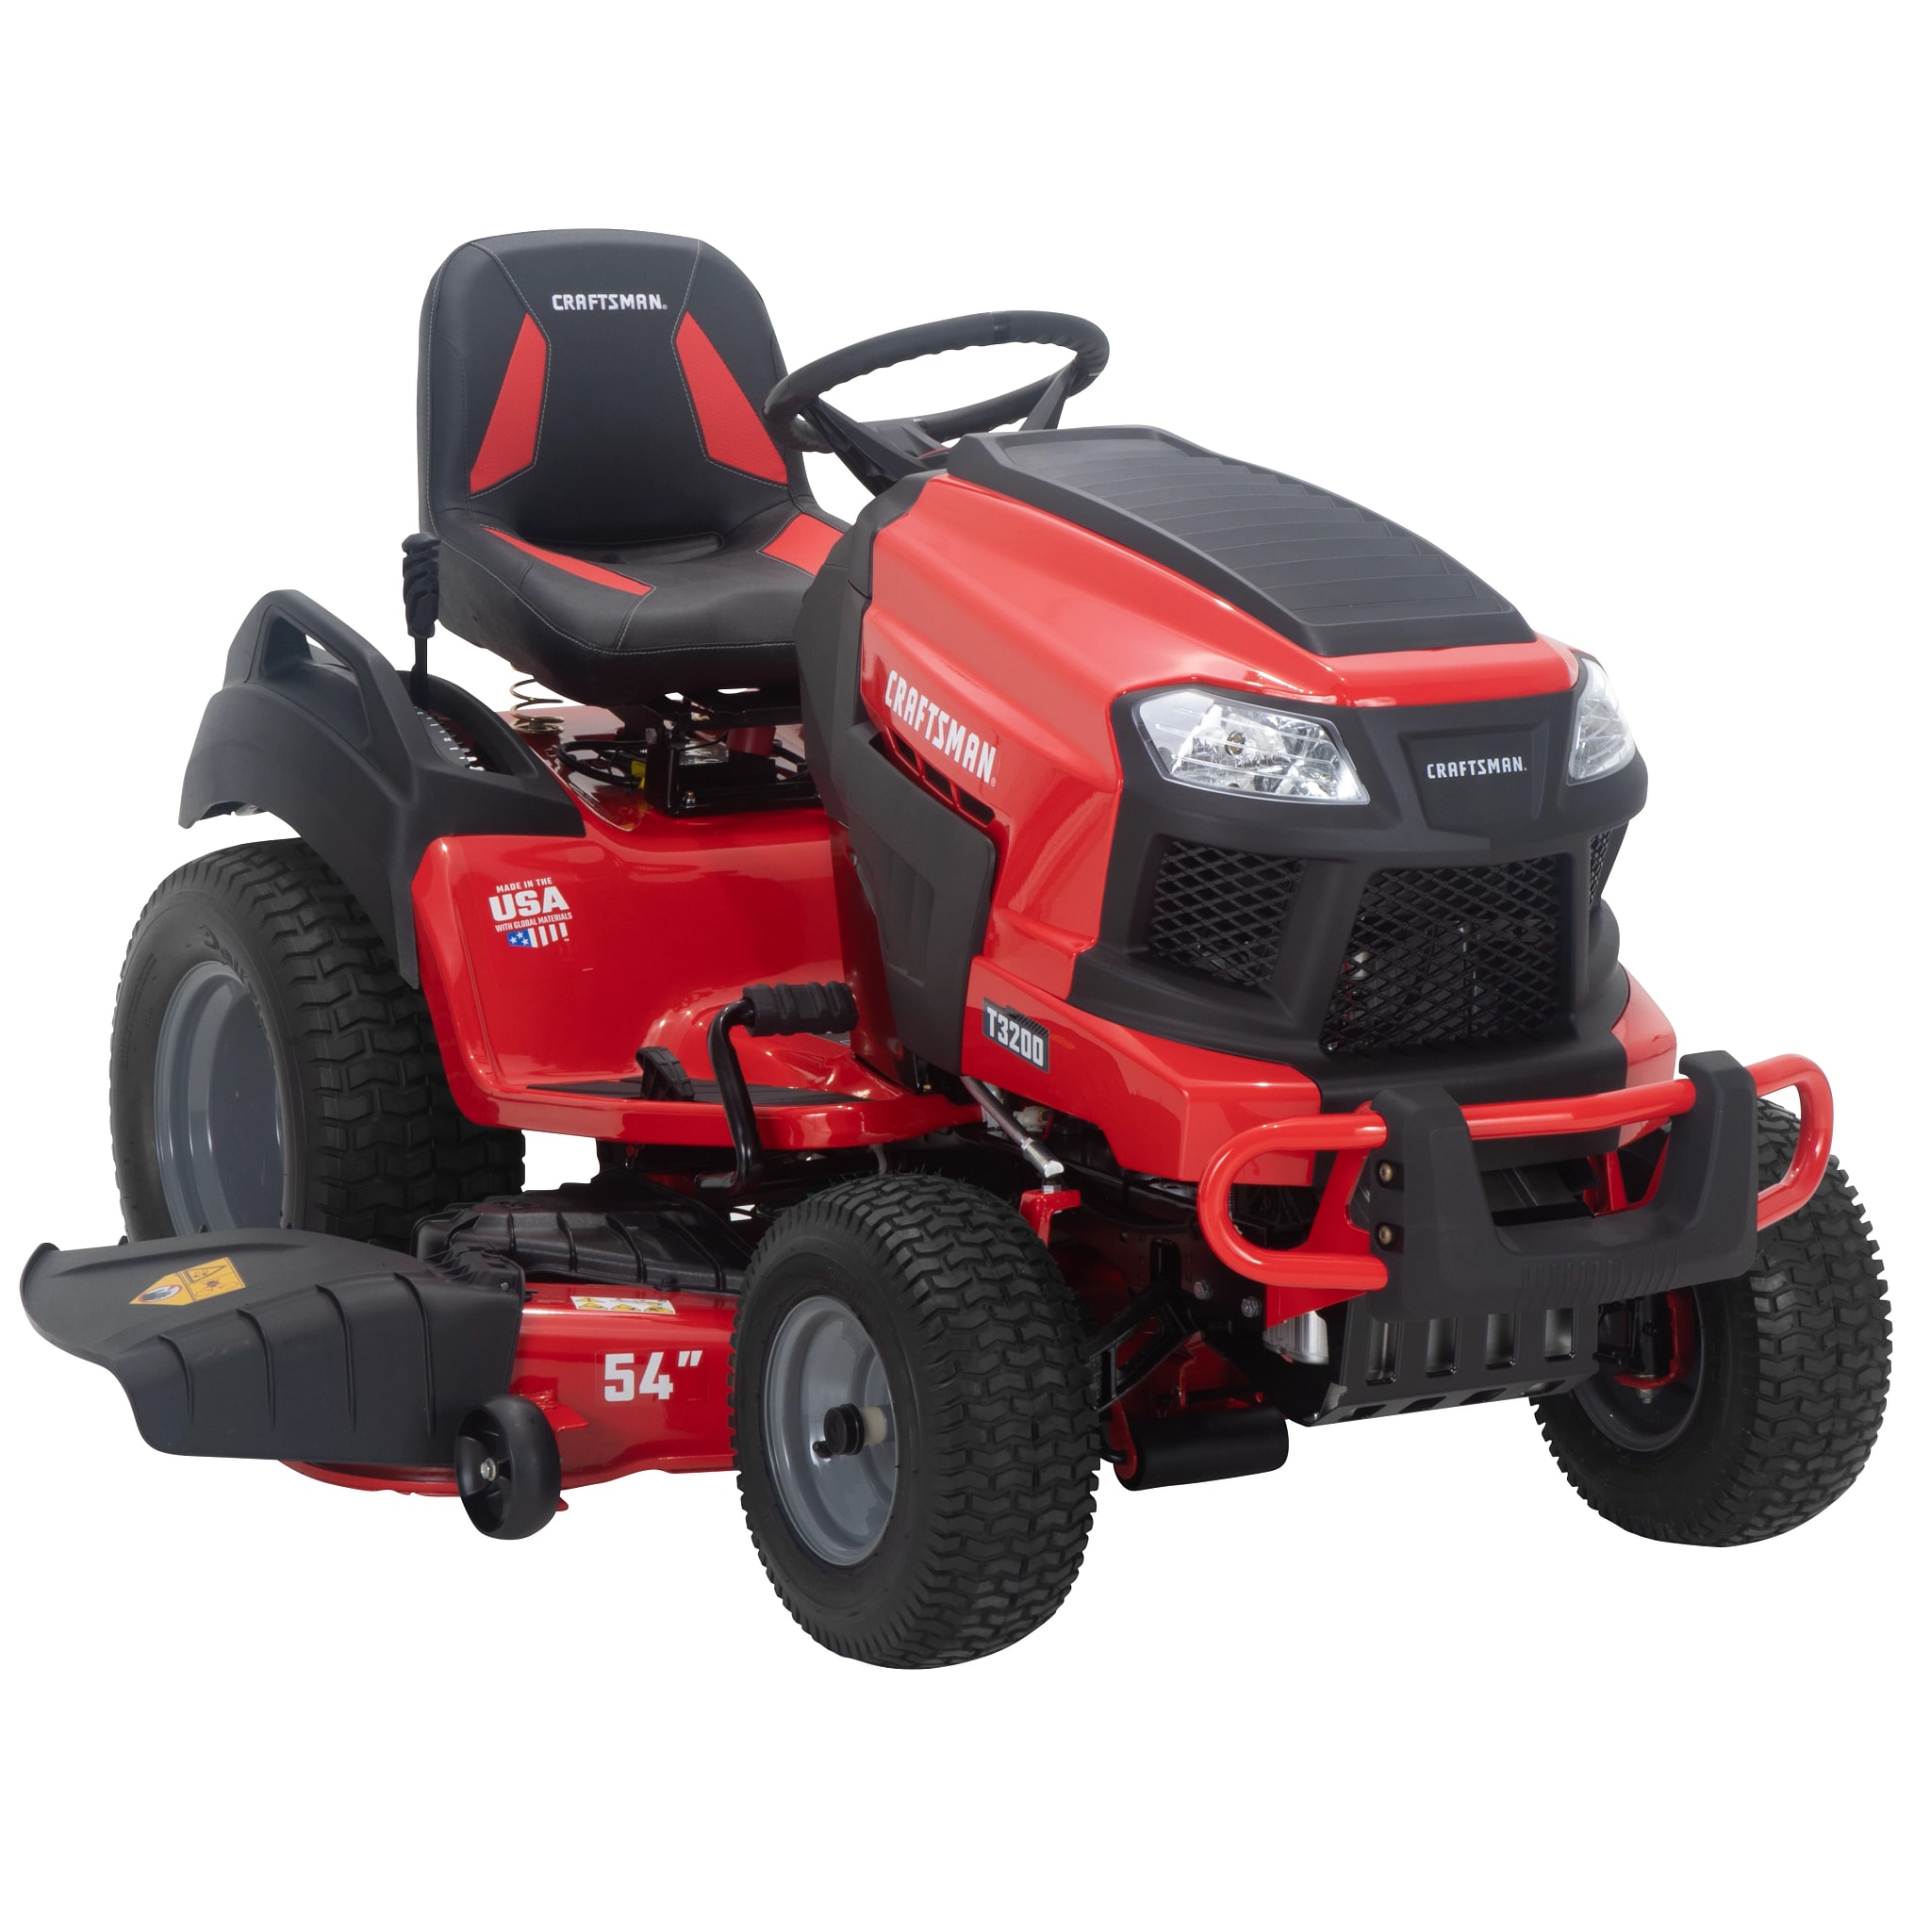 Craftsman T3200 Turn Tight 54-In 24-Hp V-Twin Riding Lawn Mower In The Gas  Riding Lawn Mowers Department At Lowes.Com